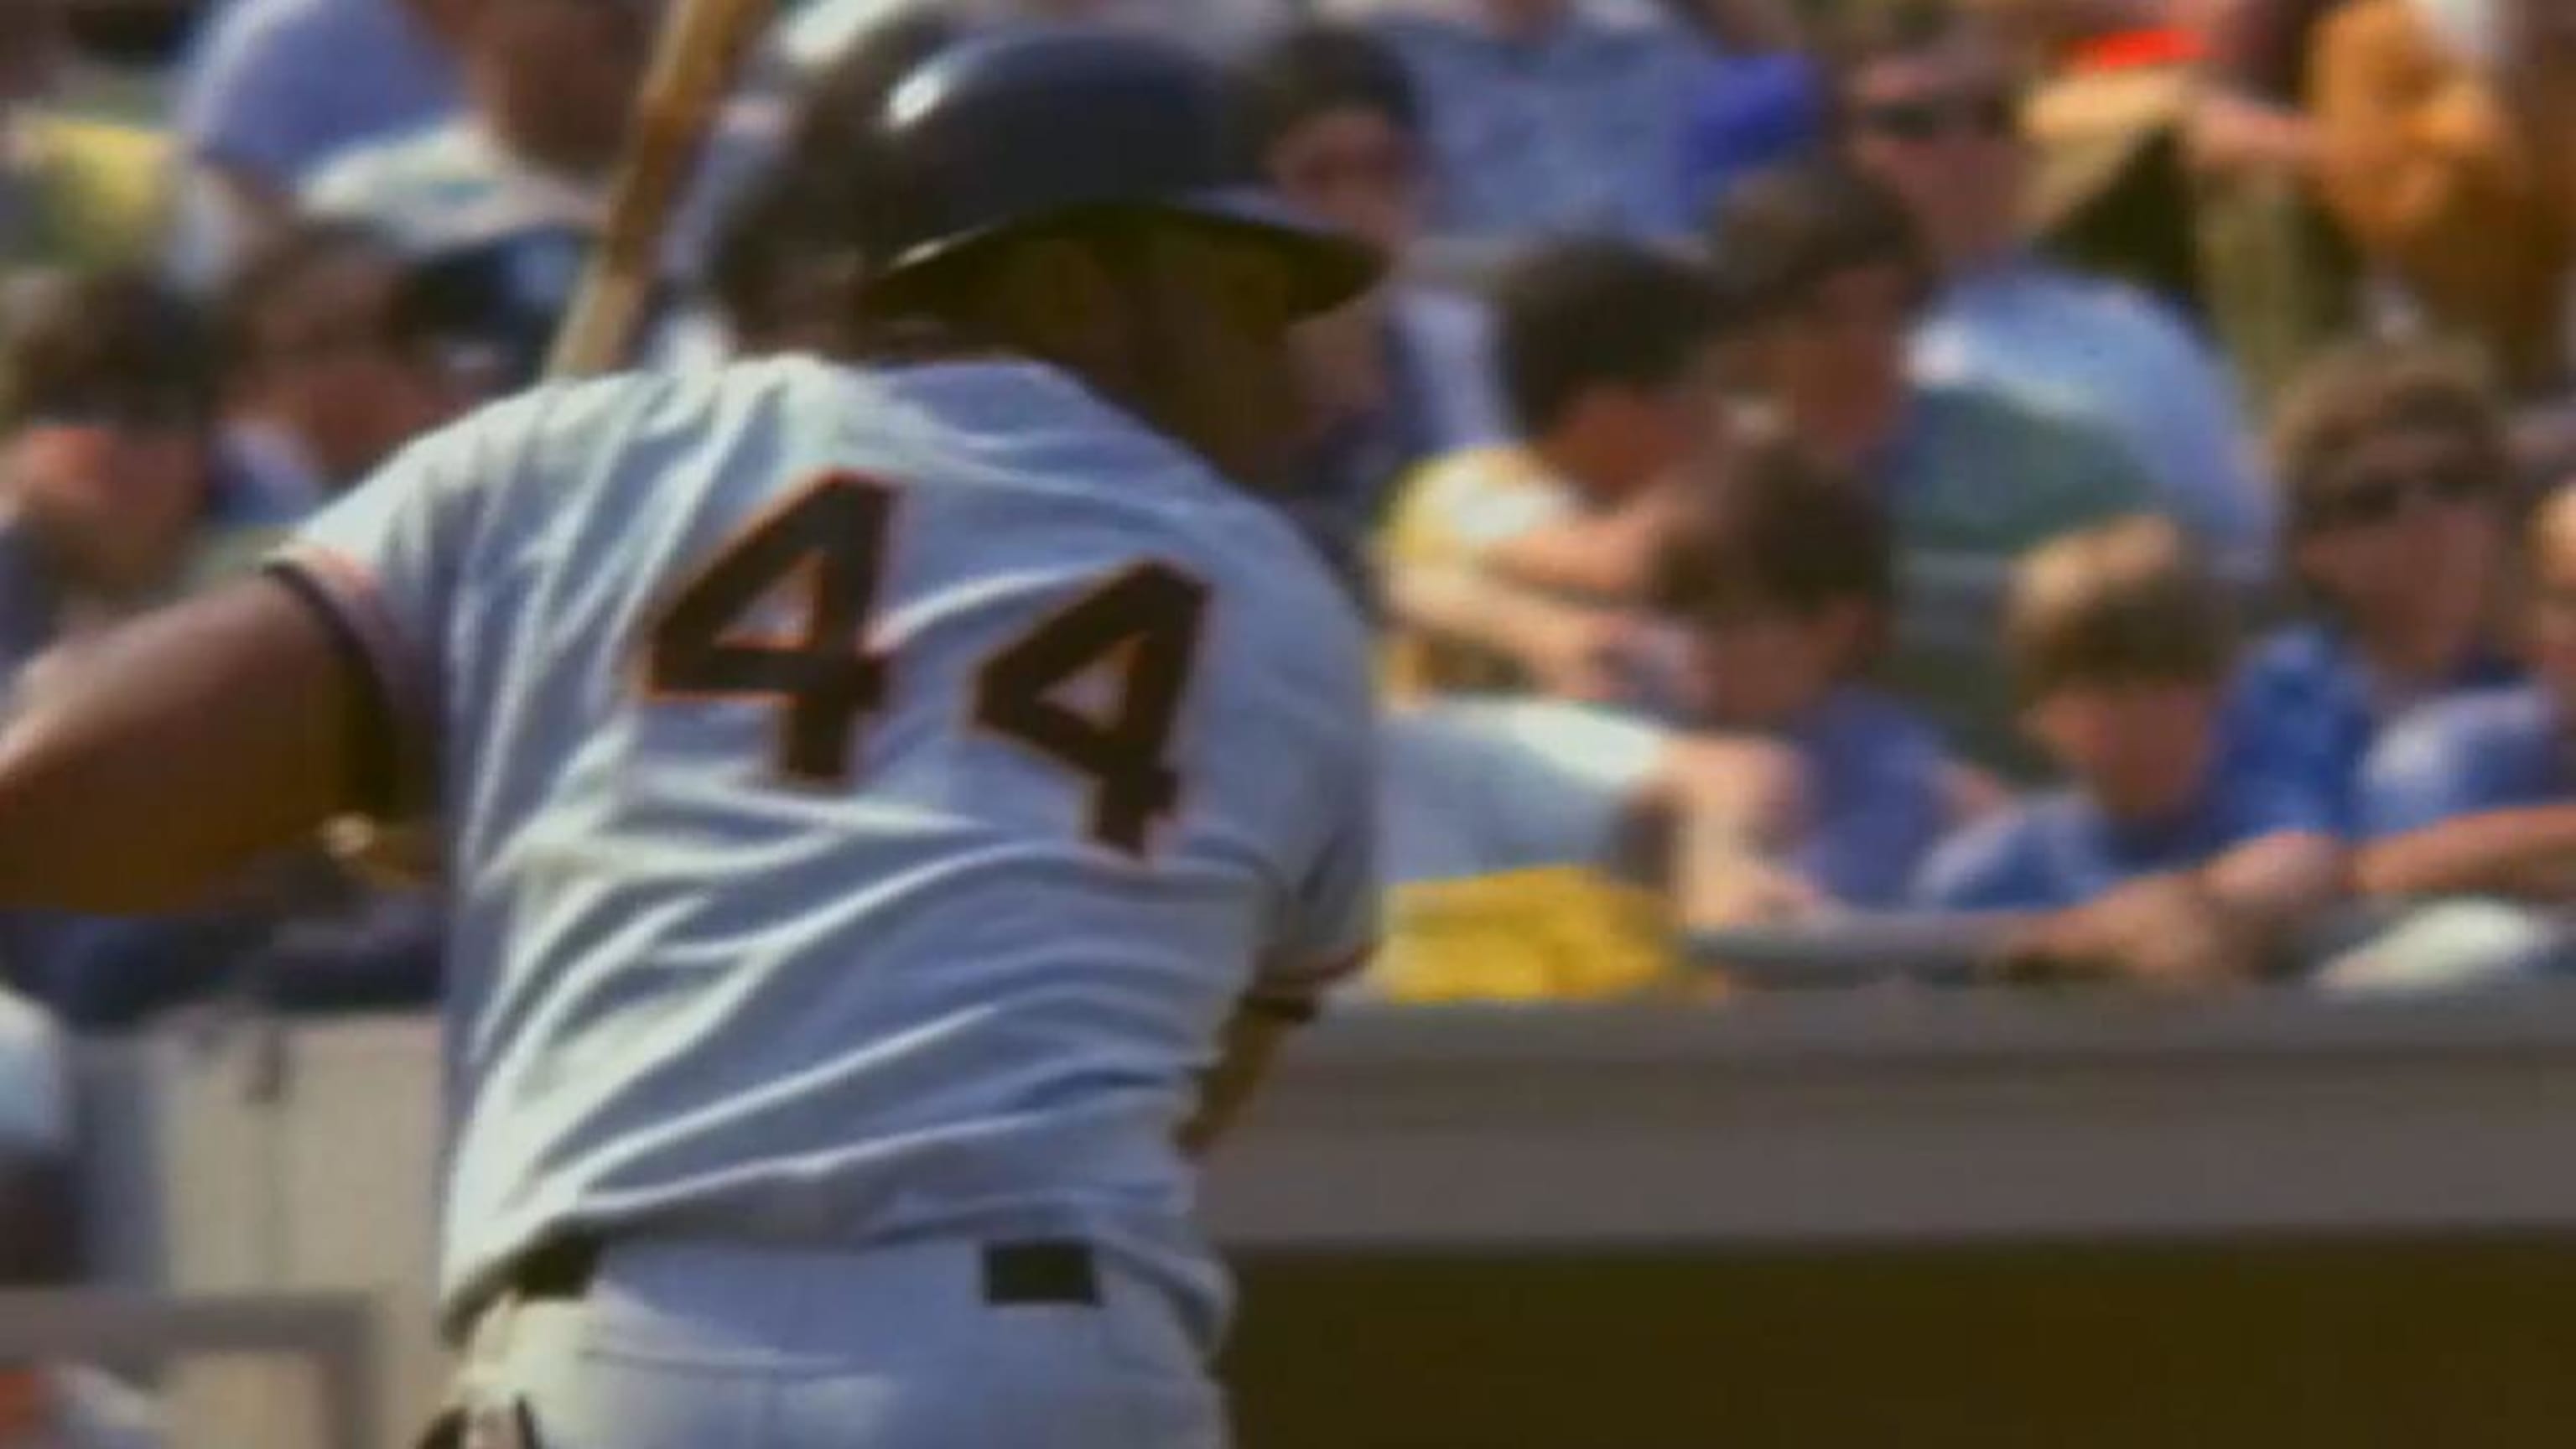 We Say a Sad Good-Bye to the Great Hall-of-Famer Willie McCovey